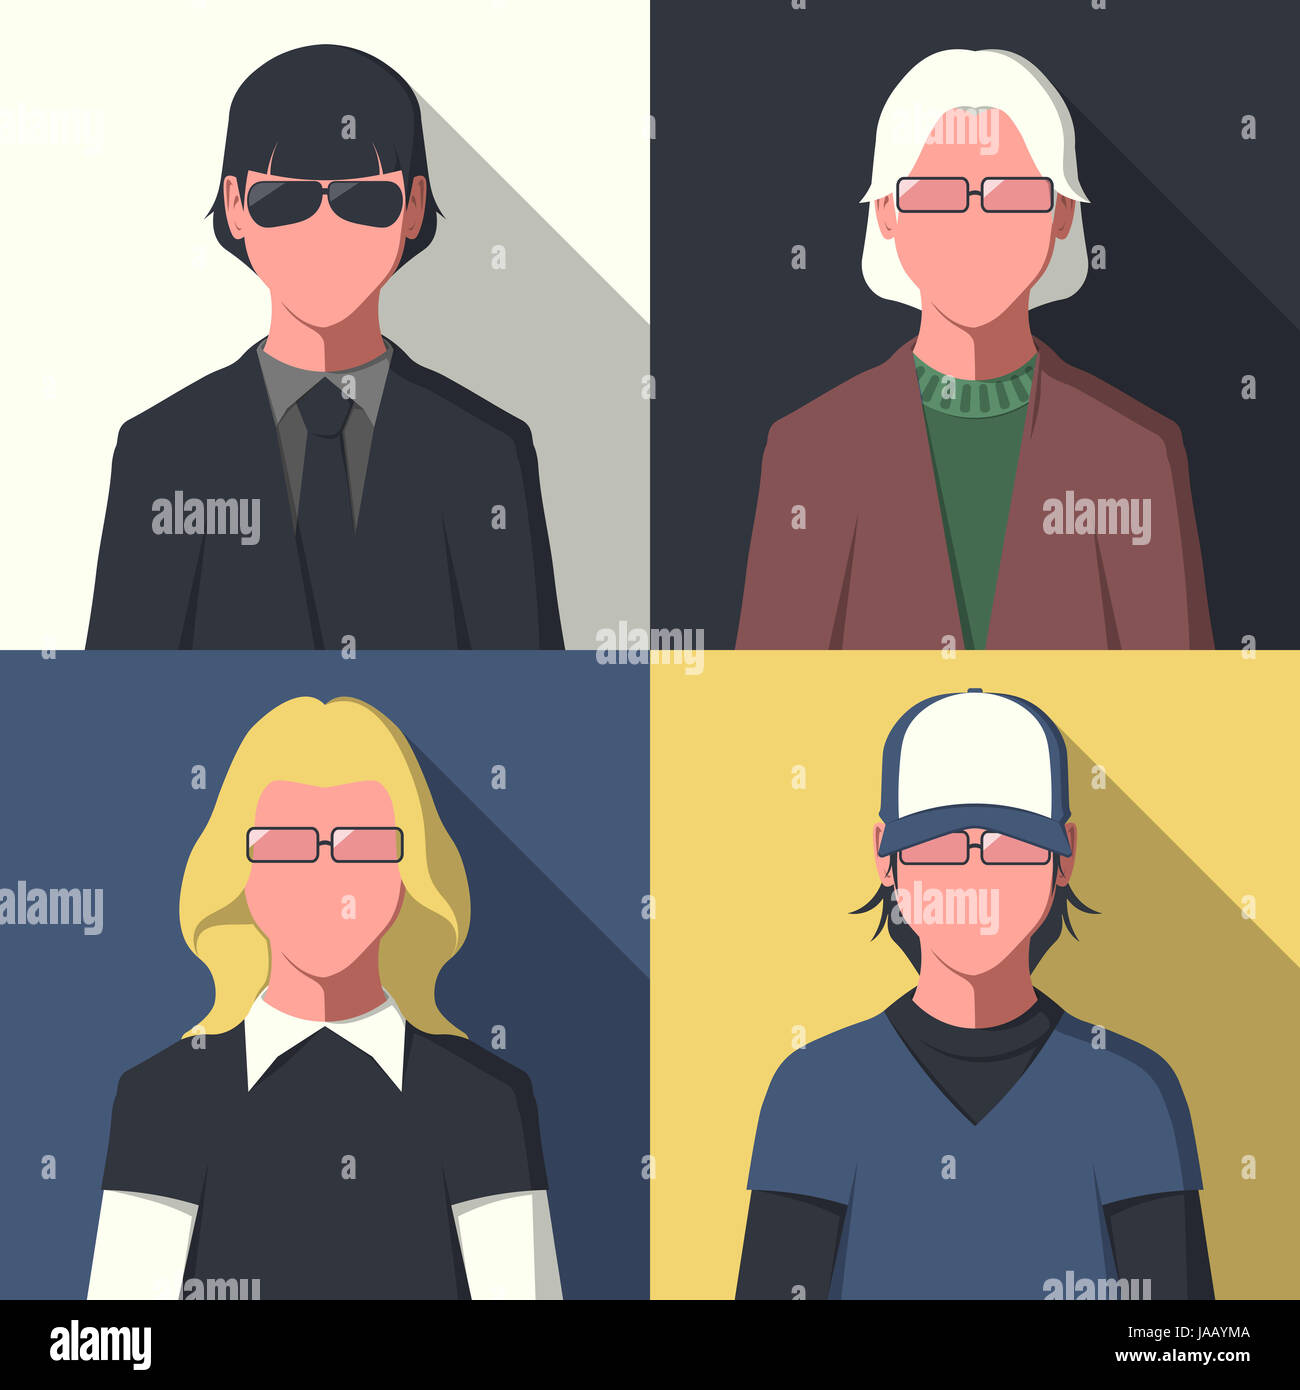 Silhouette of different people in flat style for user profile picture.  Avatar icon set. Stock Photo